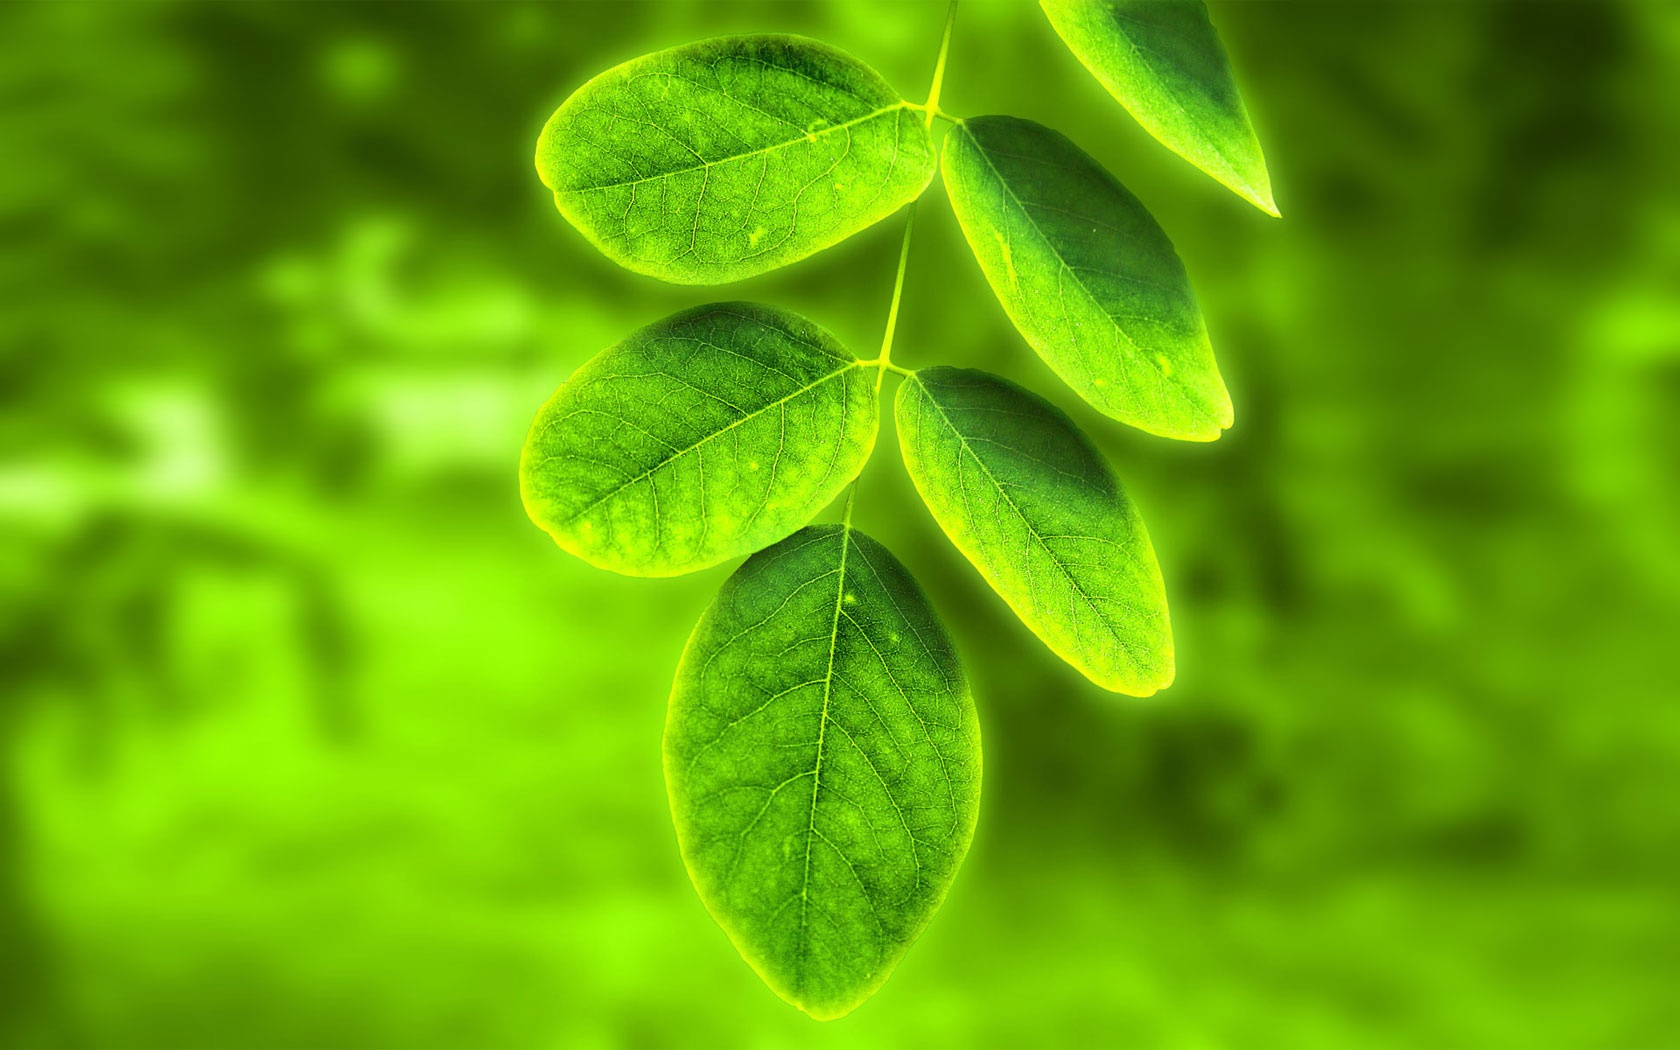  leaf Wallpapers Green leaf Backgrounds Green leaf Free HD Wallpapers